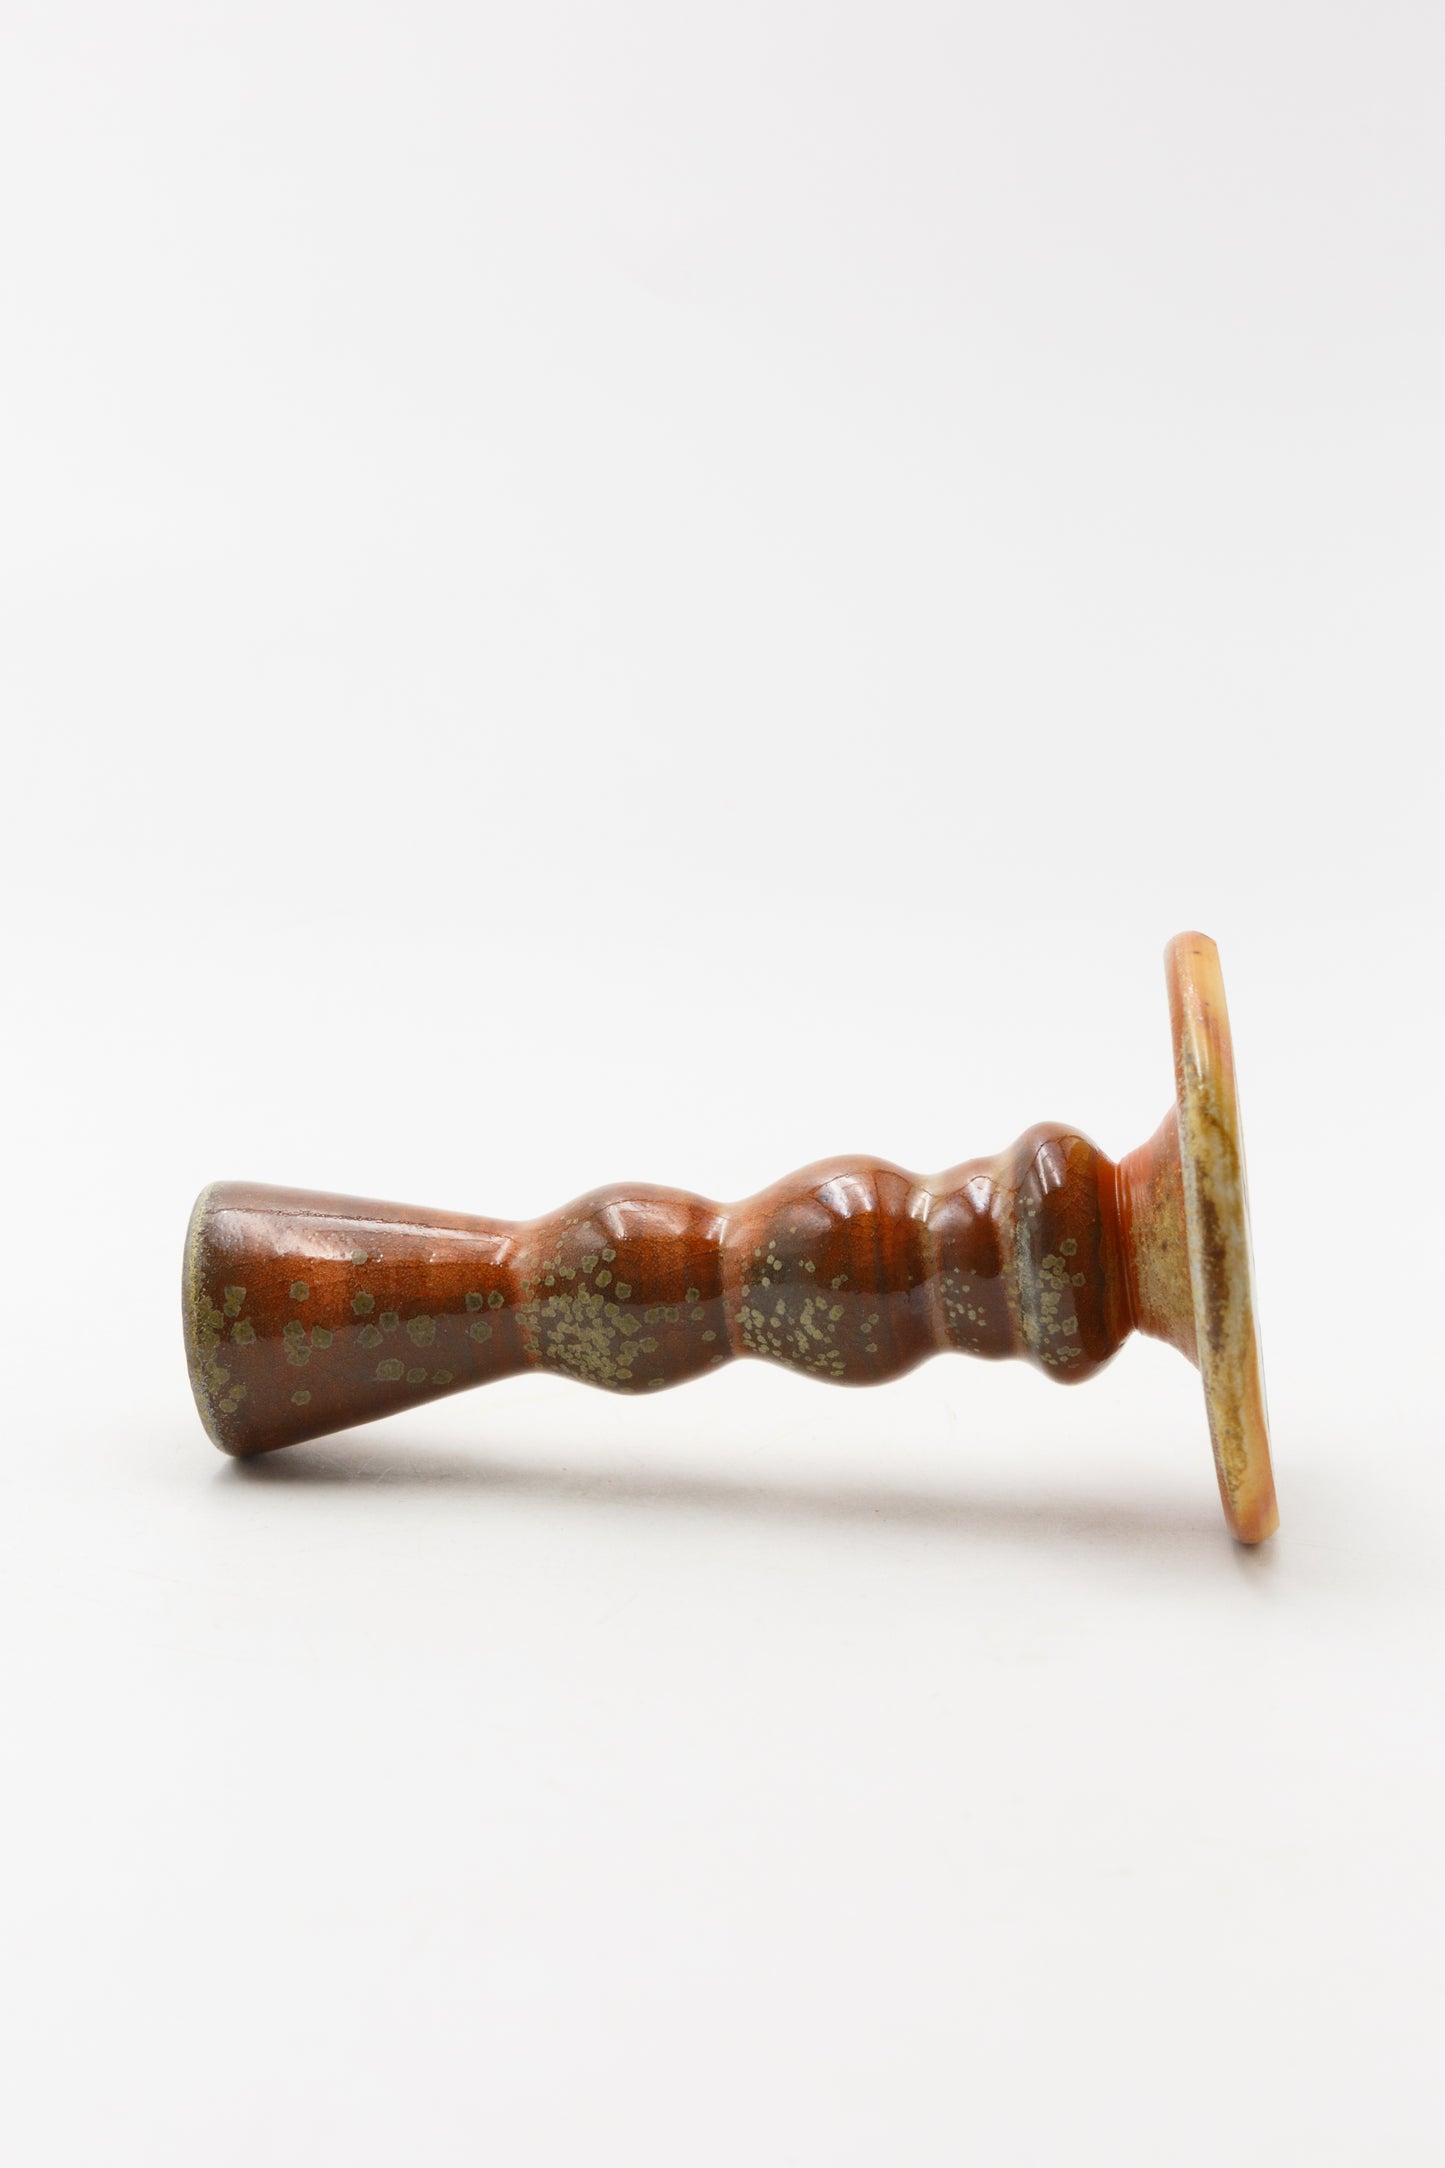 Wood Fired Candlestick 003